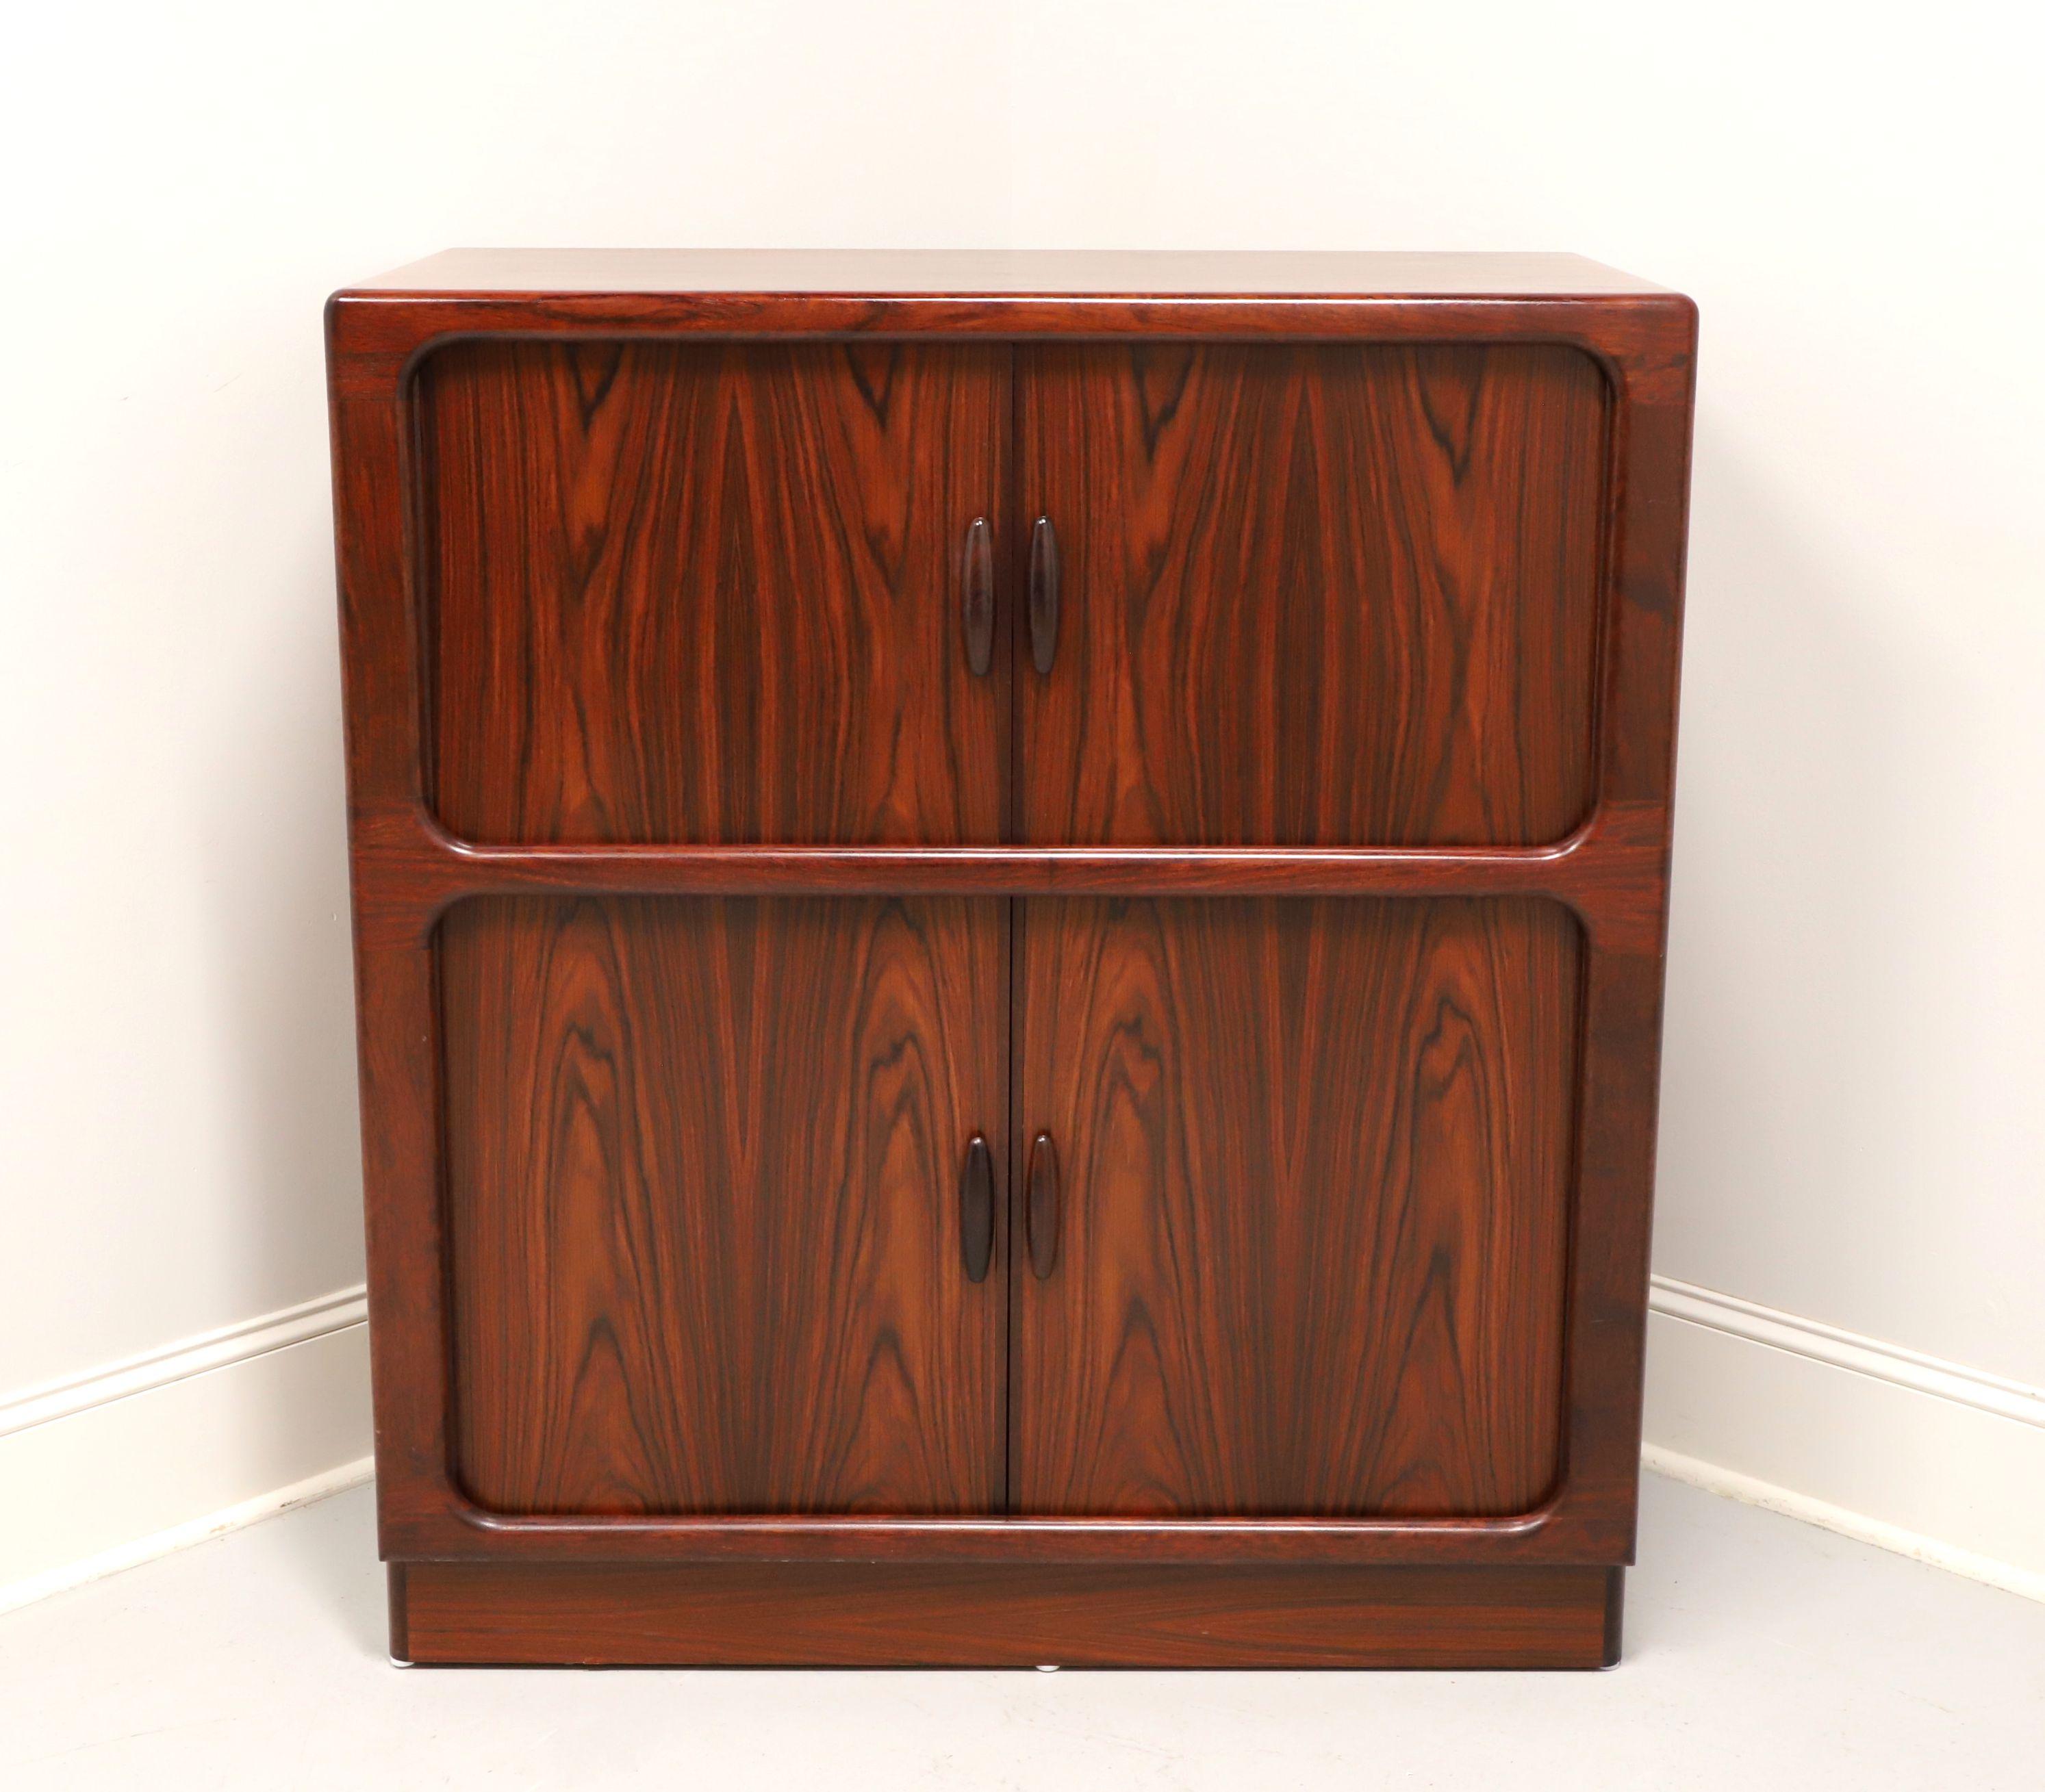 A Danish Modern style bar cabinet by Drylund. Rosewood, retractable tambour doors and rosewood handles. Features upper lighted cabinet with two retractable doors revealing a mirror back, one fixed wood shelf and a pull-out laminate top surface.